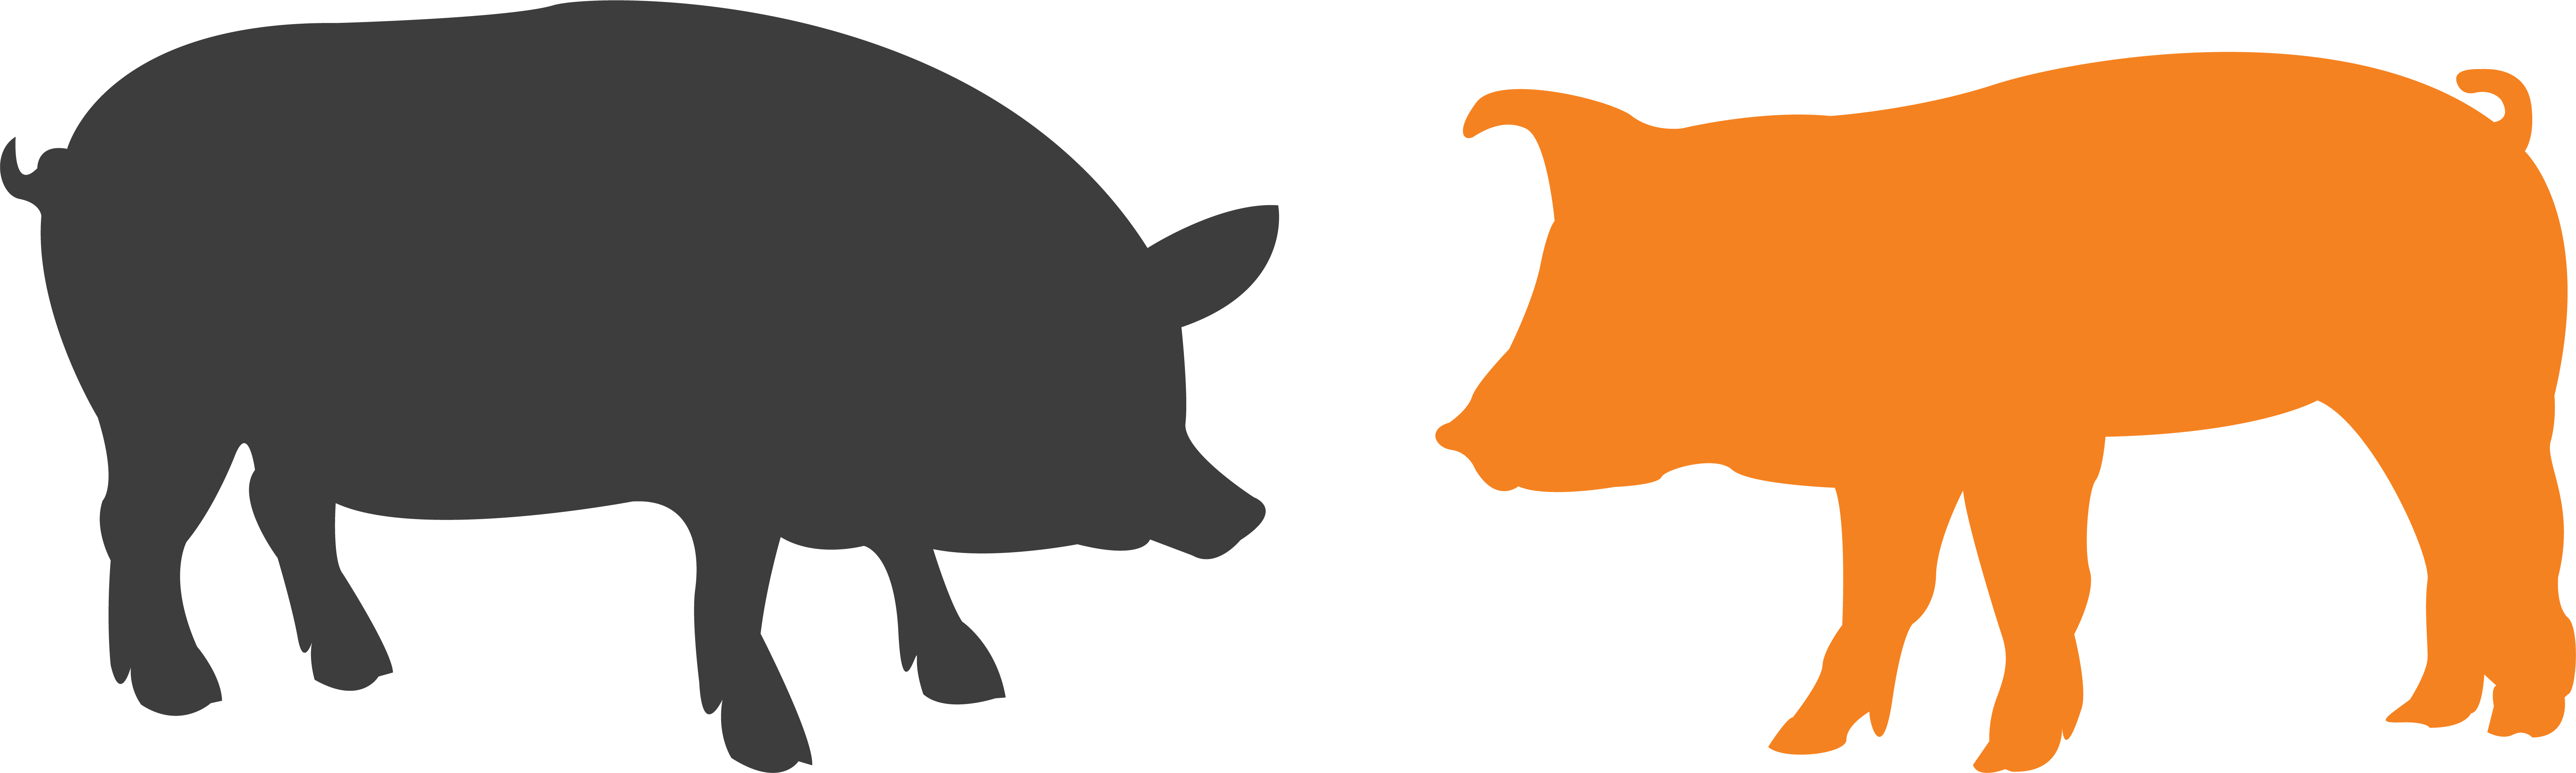 Silhouette graphic of two pigs